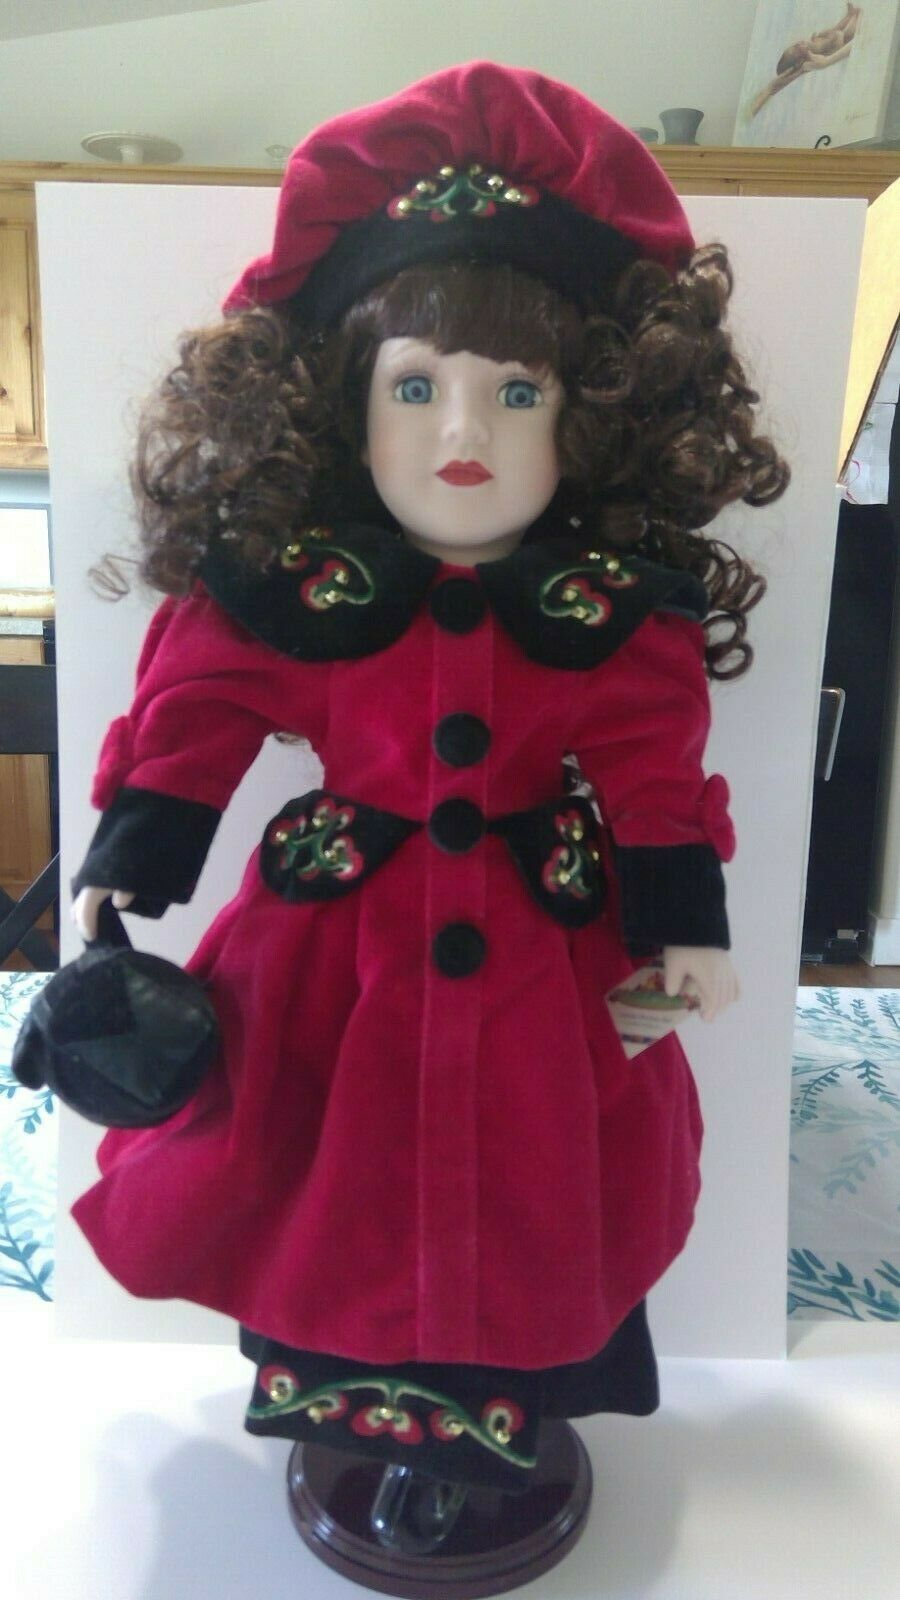 Victorian Collection Porcelain Doll By Melissa Jane, Dressed In Red Velvet Dress